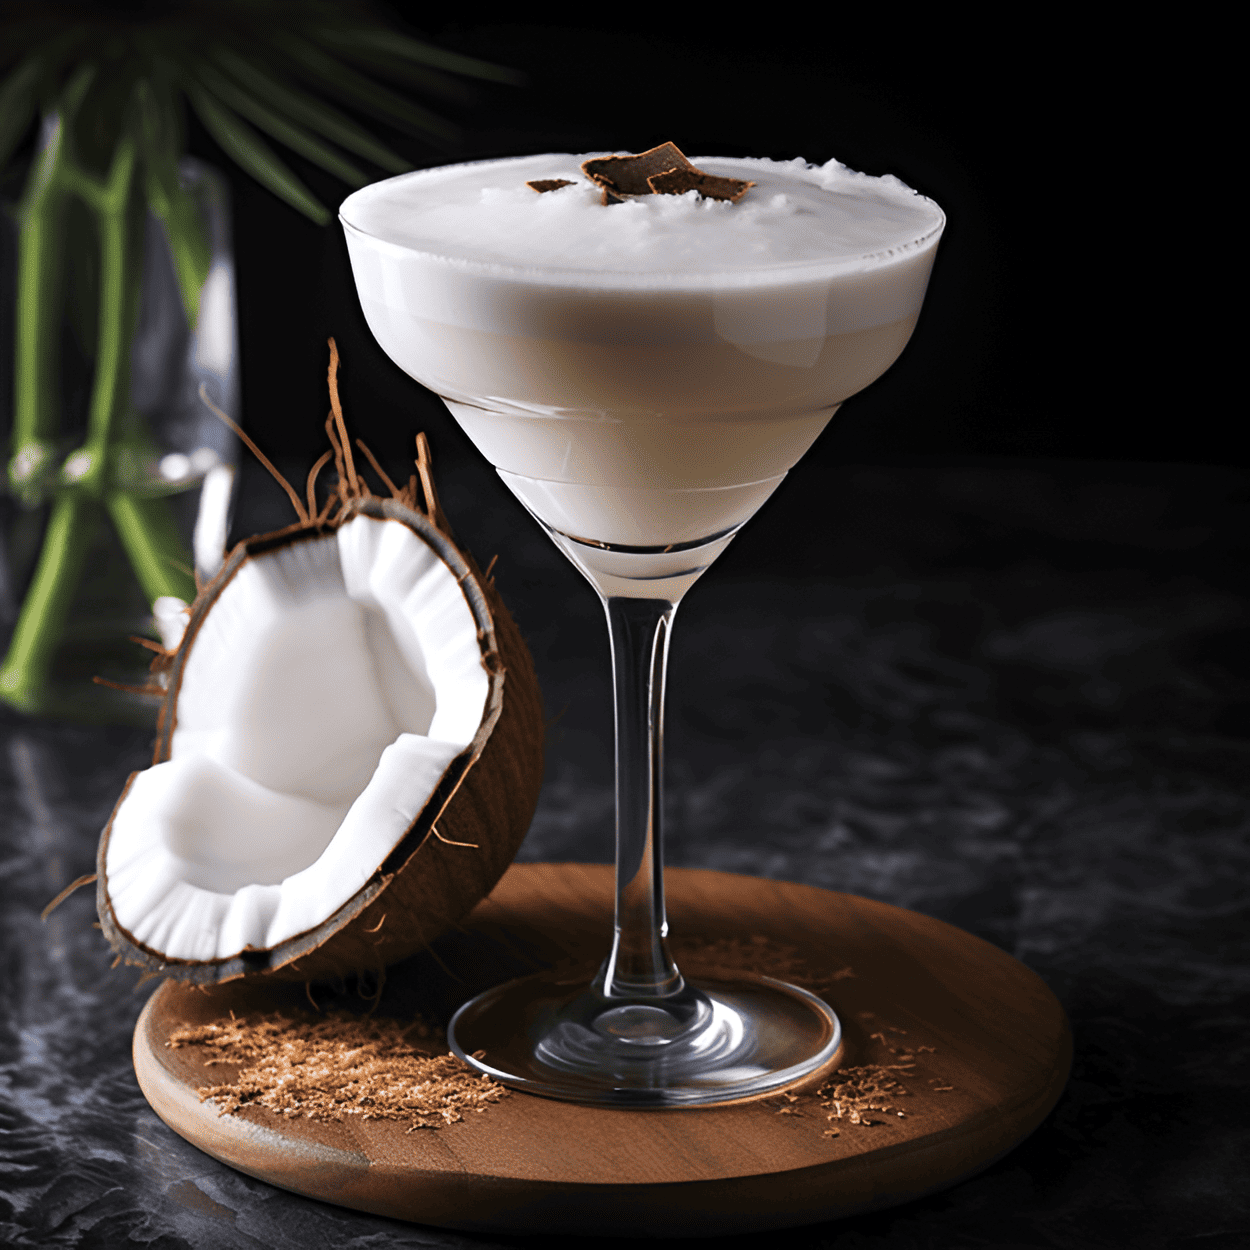 Coconut White Russian Cocktail Recipe - This cocktail is creamy, sweet, and slightly nutty. The coconut milk gives it a tropical twist, while the vodka and coffee liqueur provide a strong, robust flavor. It's a rich and indulgent drink that leaves a lingering taste of coconut on the palate.